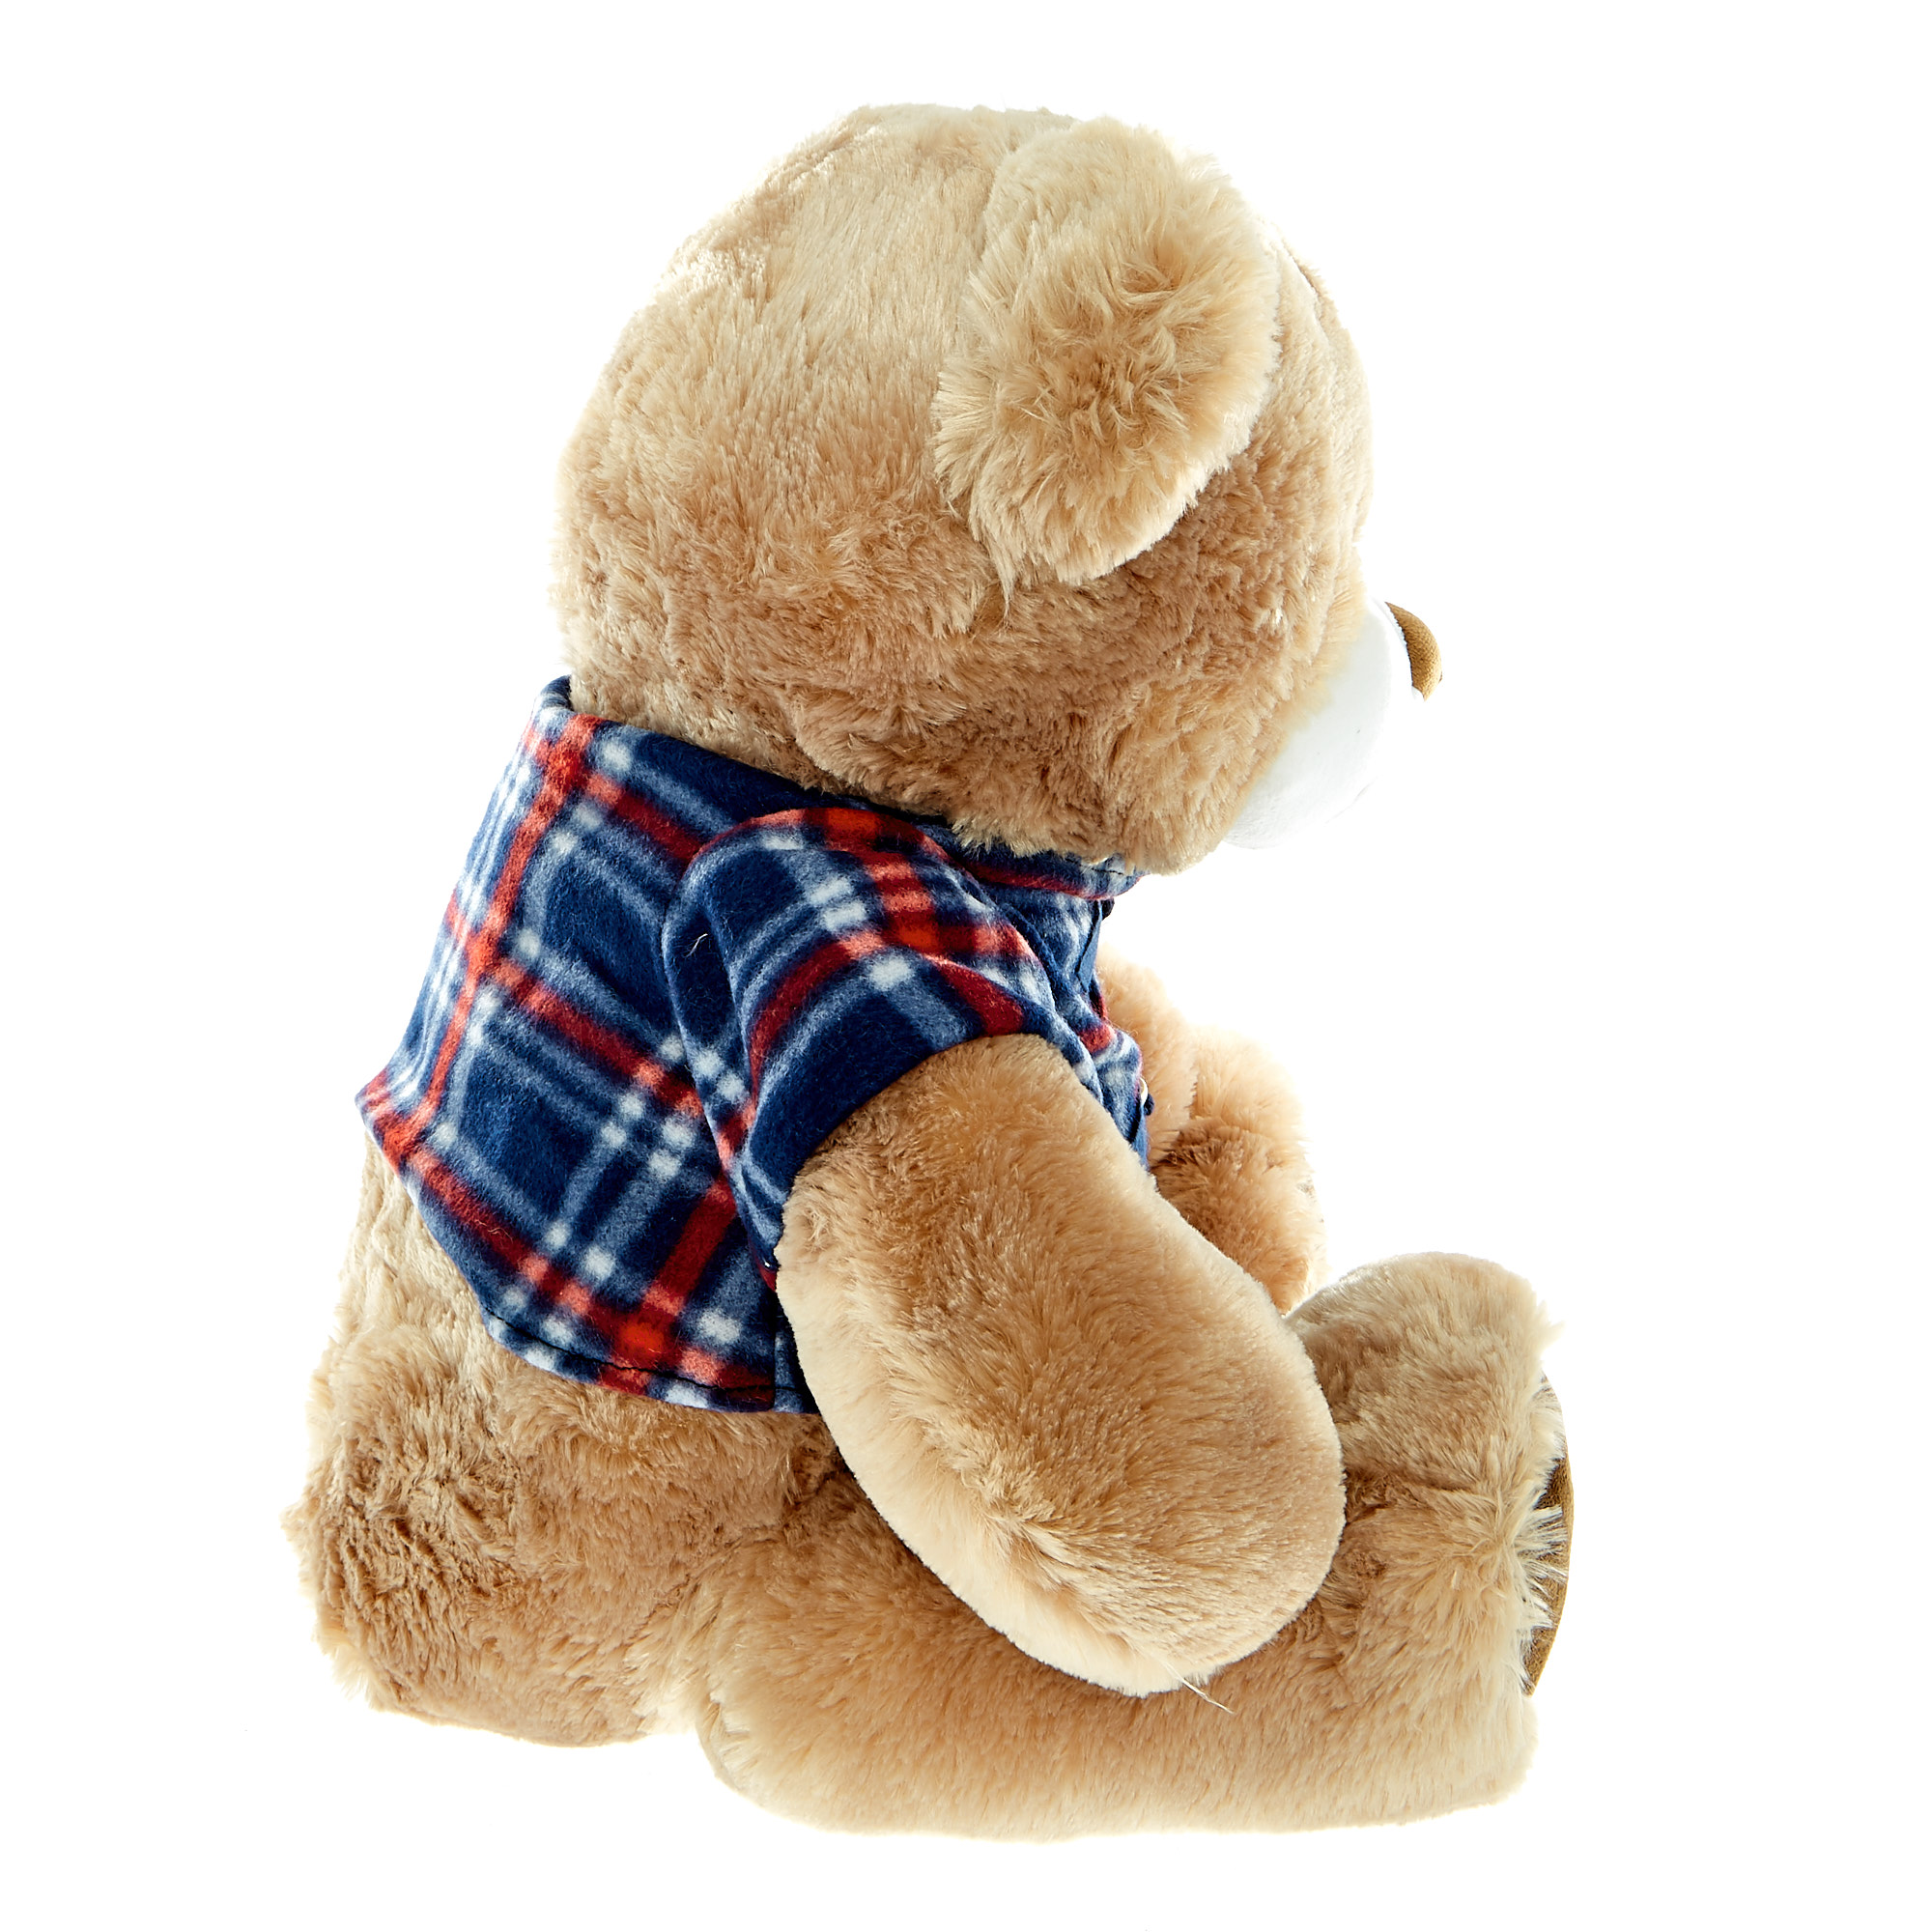 Large Bear in Duffle Coat Soft Toy 